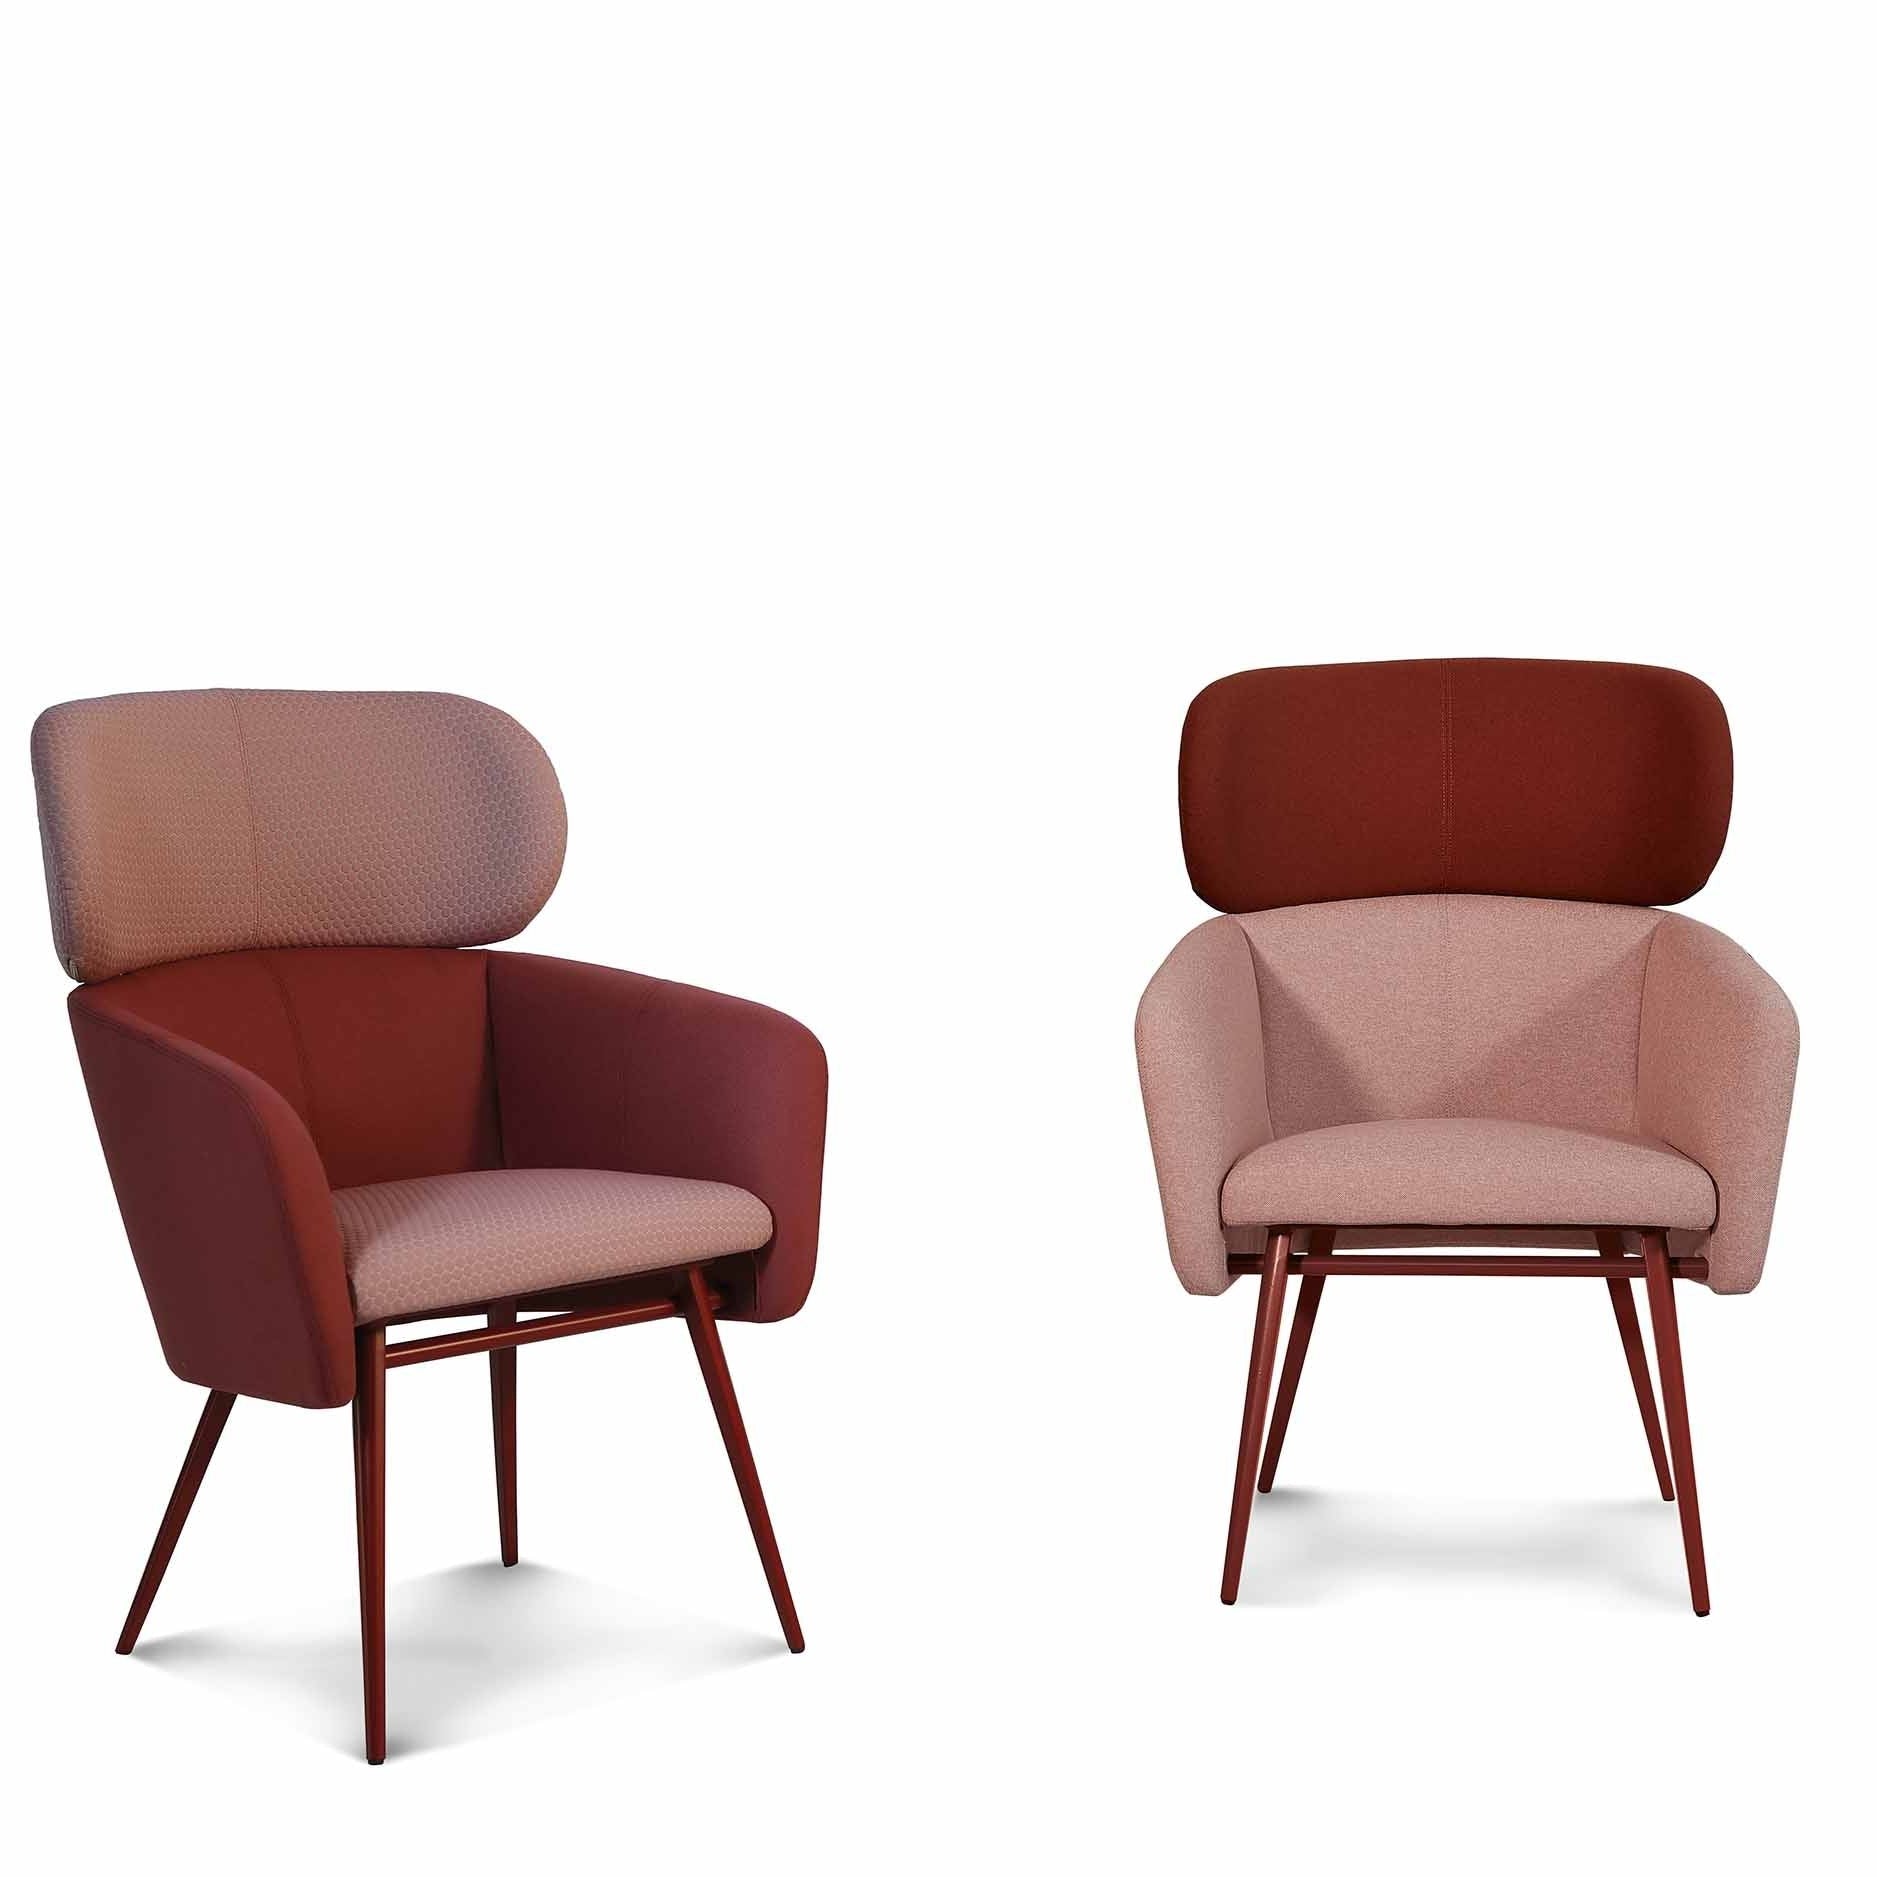 BALU XL MET Armchair cherry and pink two armchairs